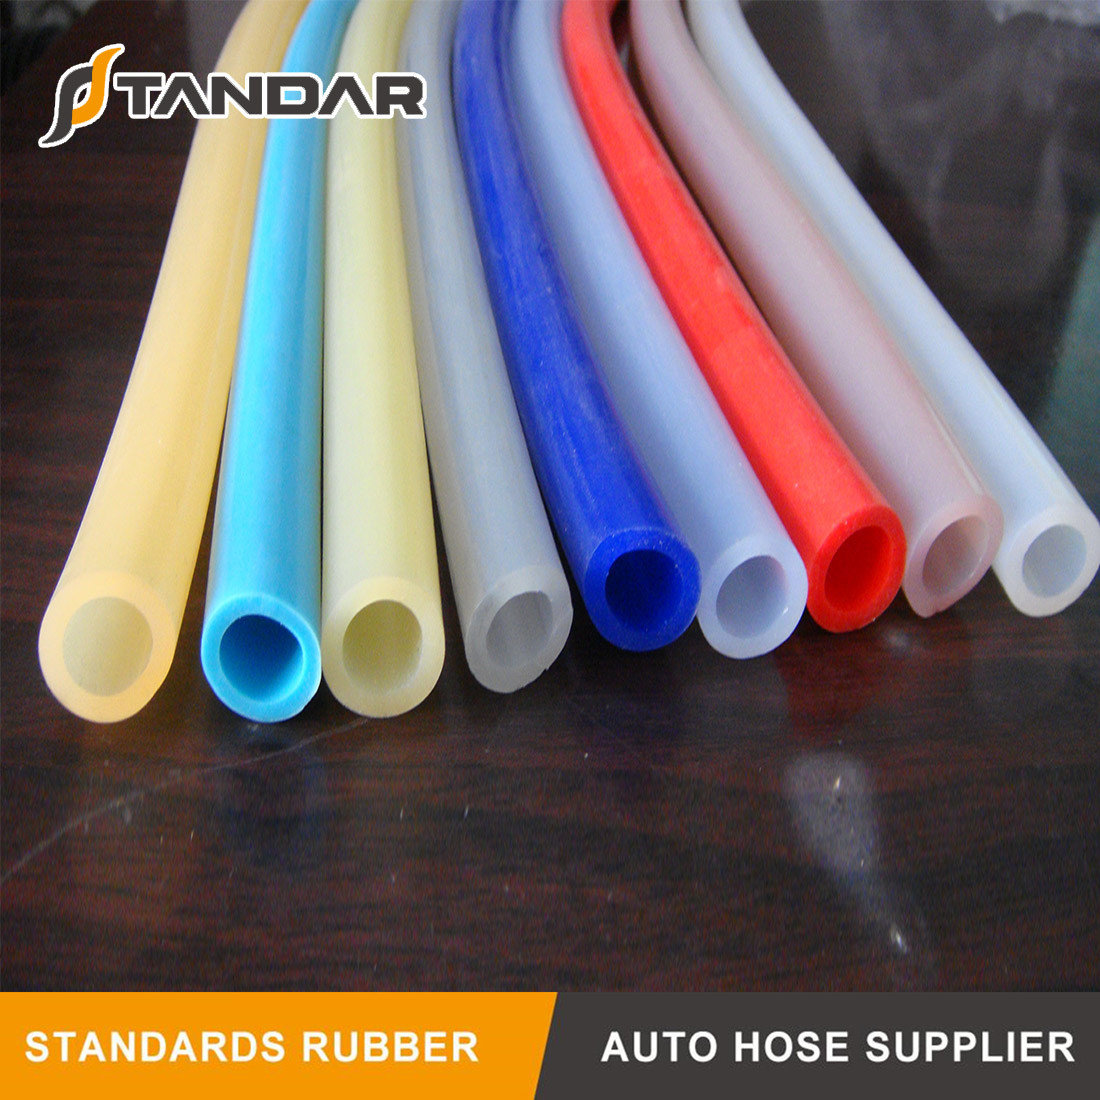 Can the yellowed silicone tube still be used?